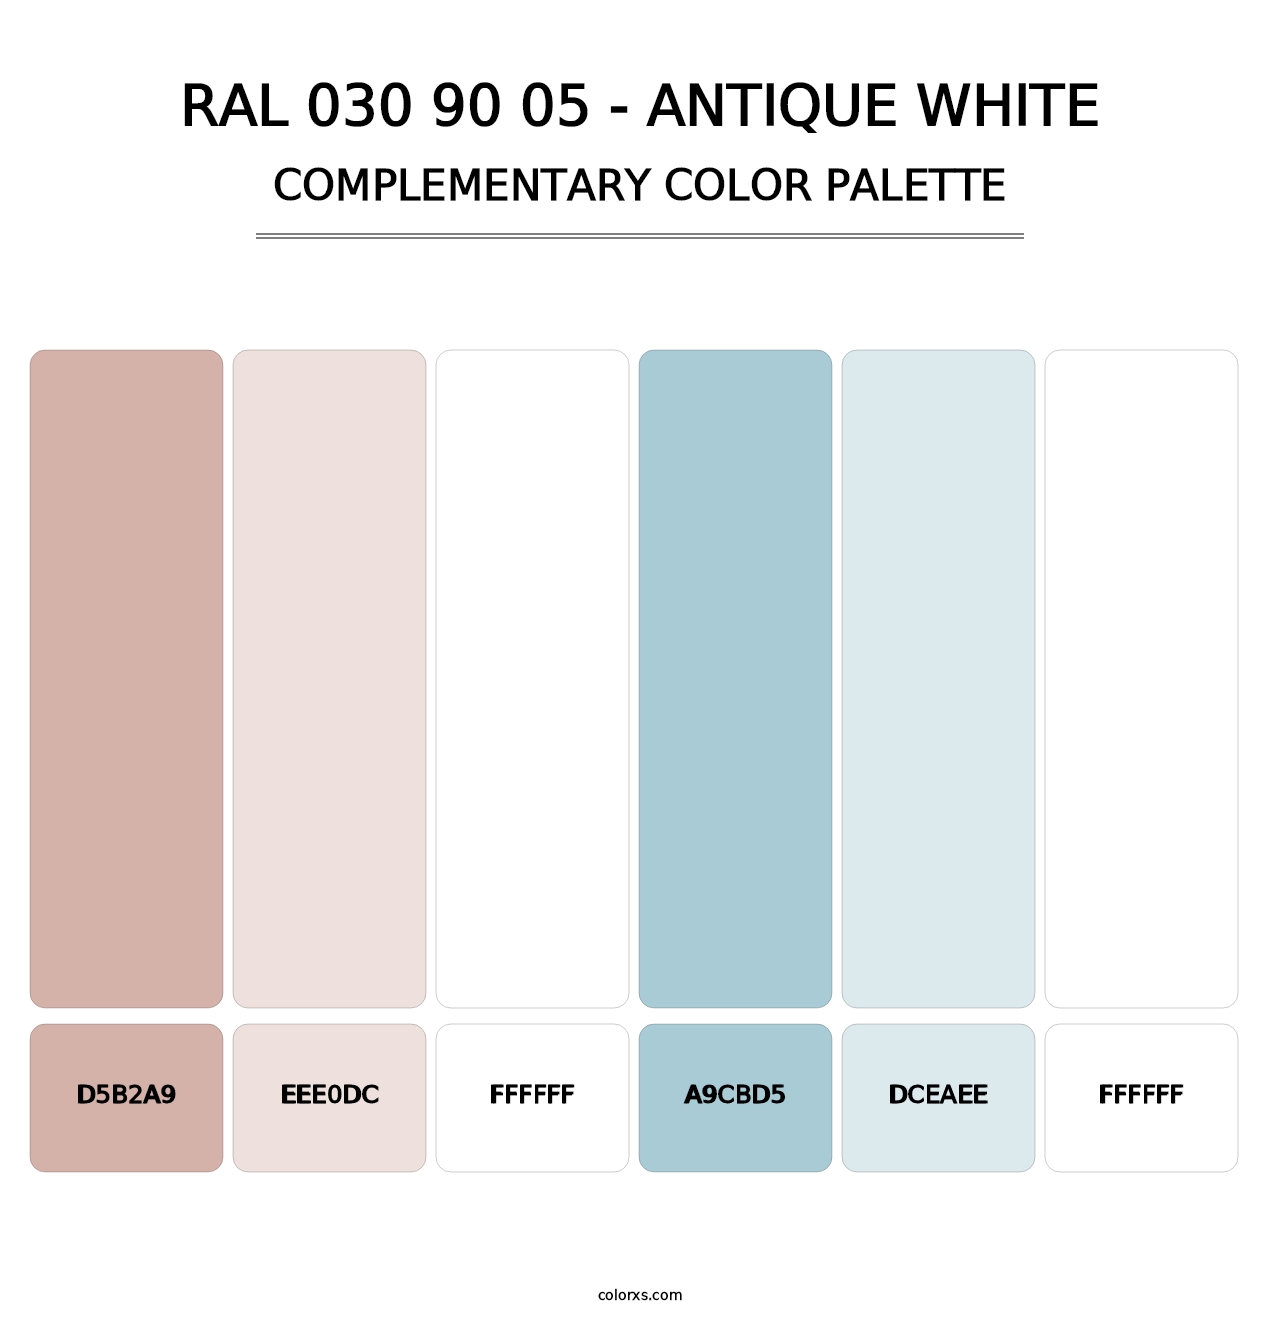 RAL 030 90 05 - Antique White - Complementary Color Palette